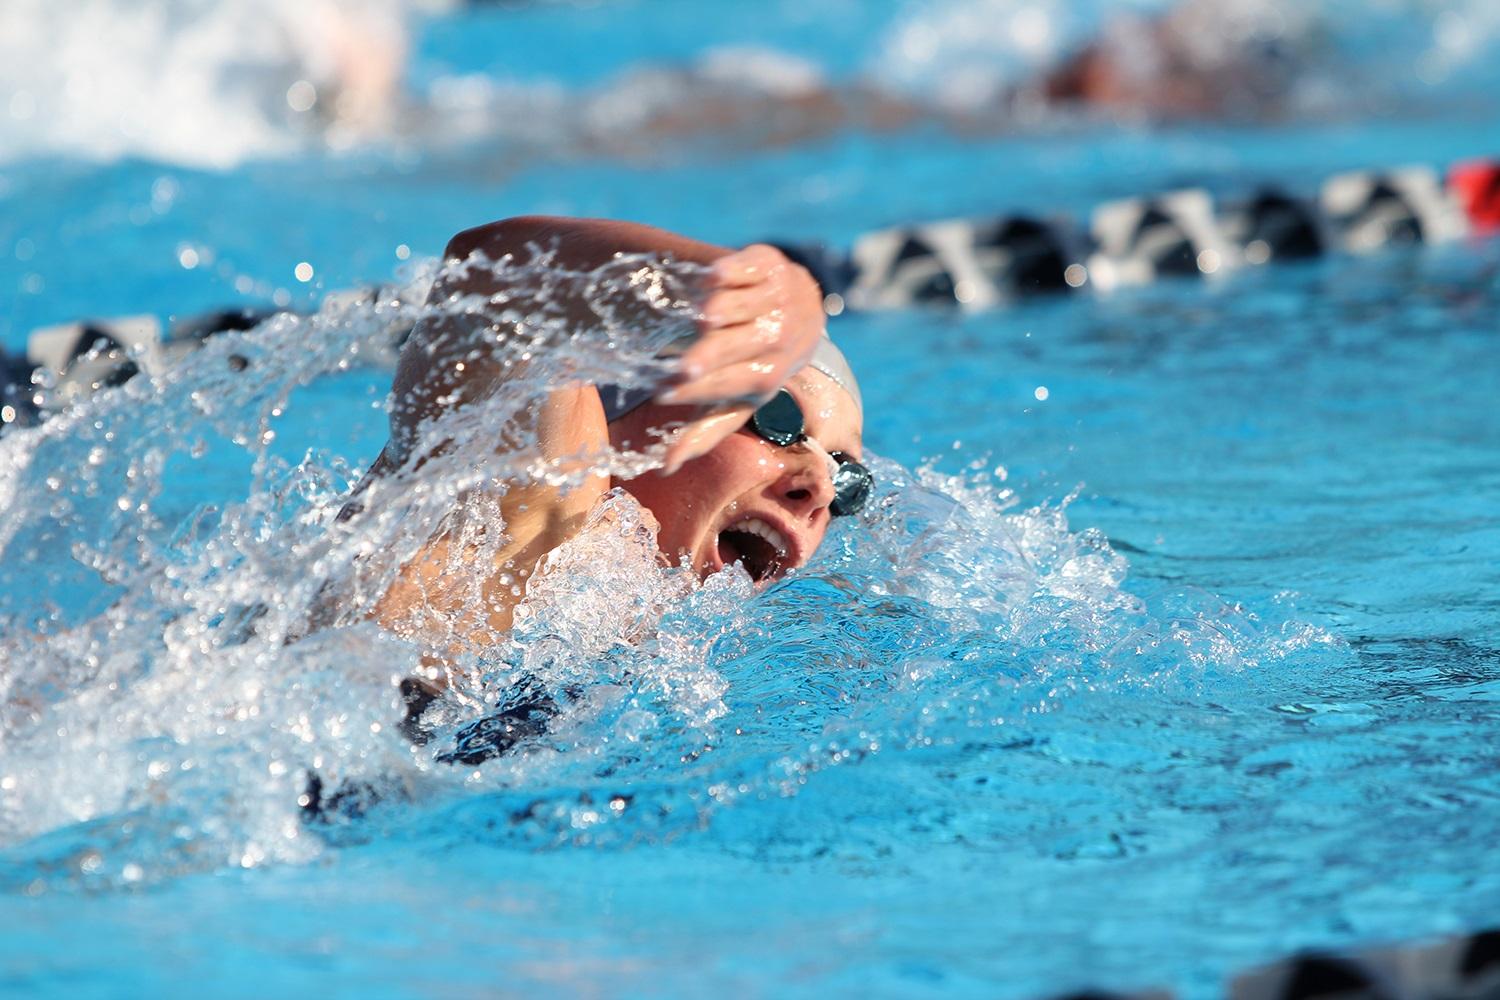 An FAU women’s swimmer in the midst of the freestyle.